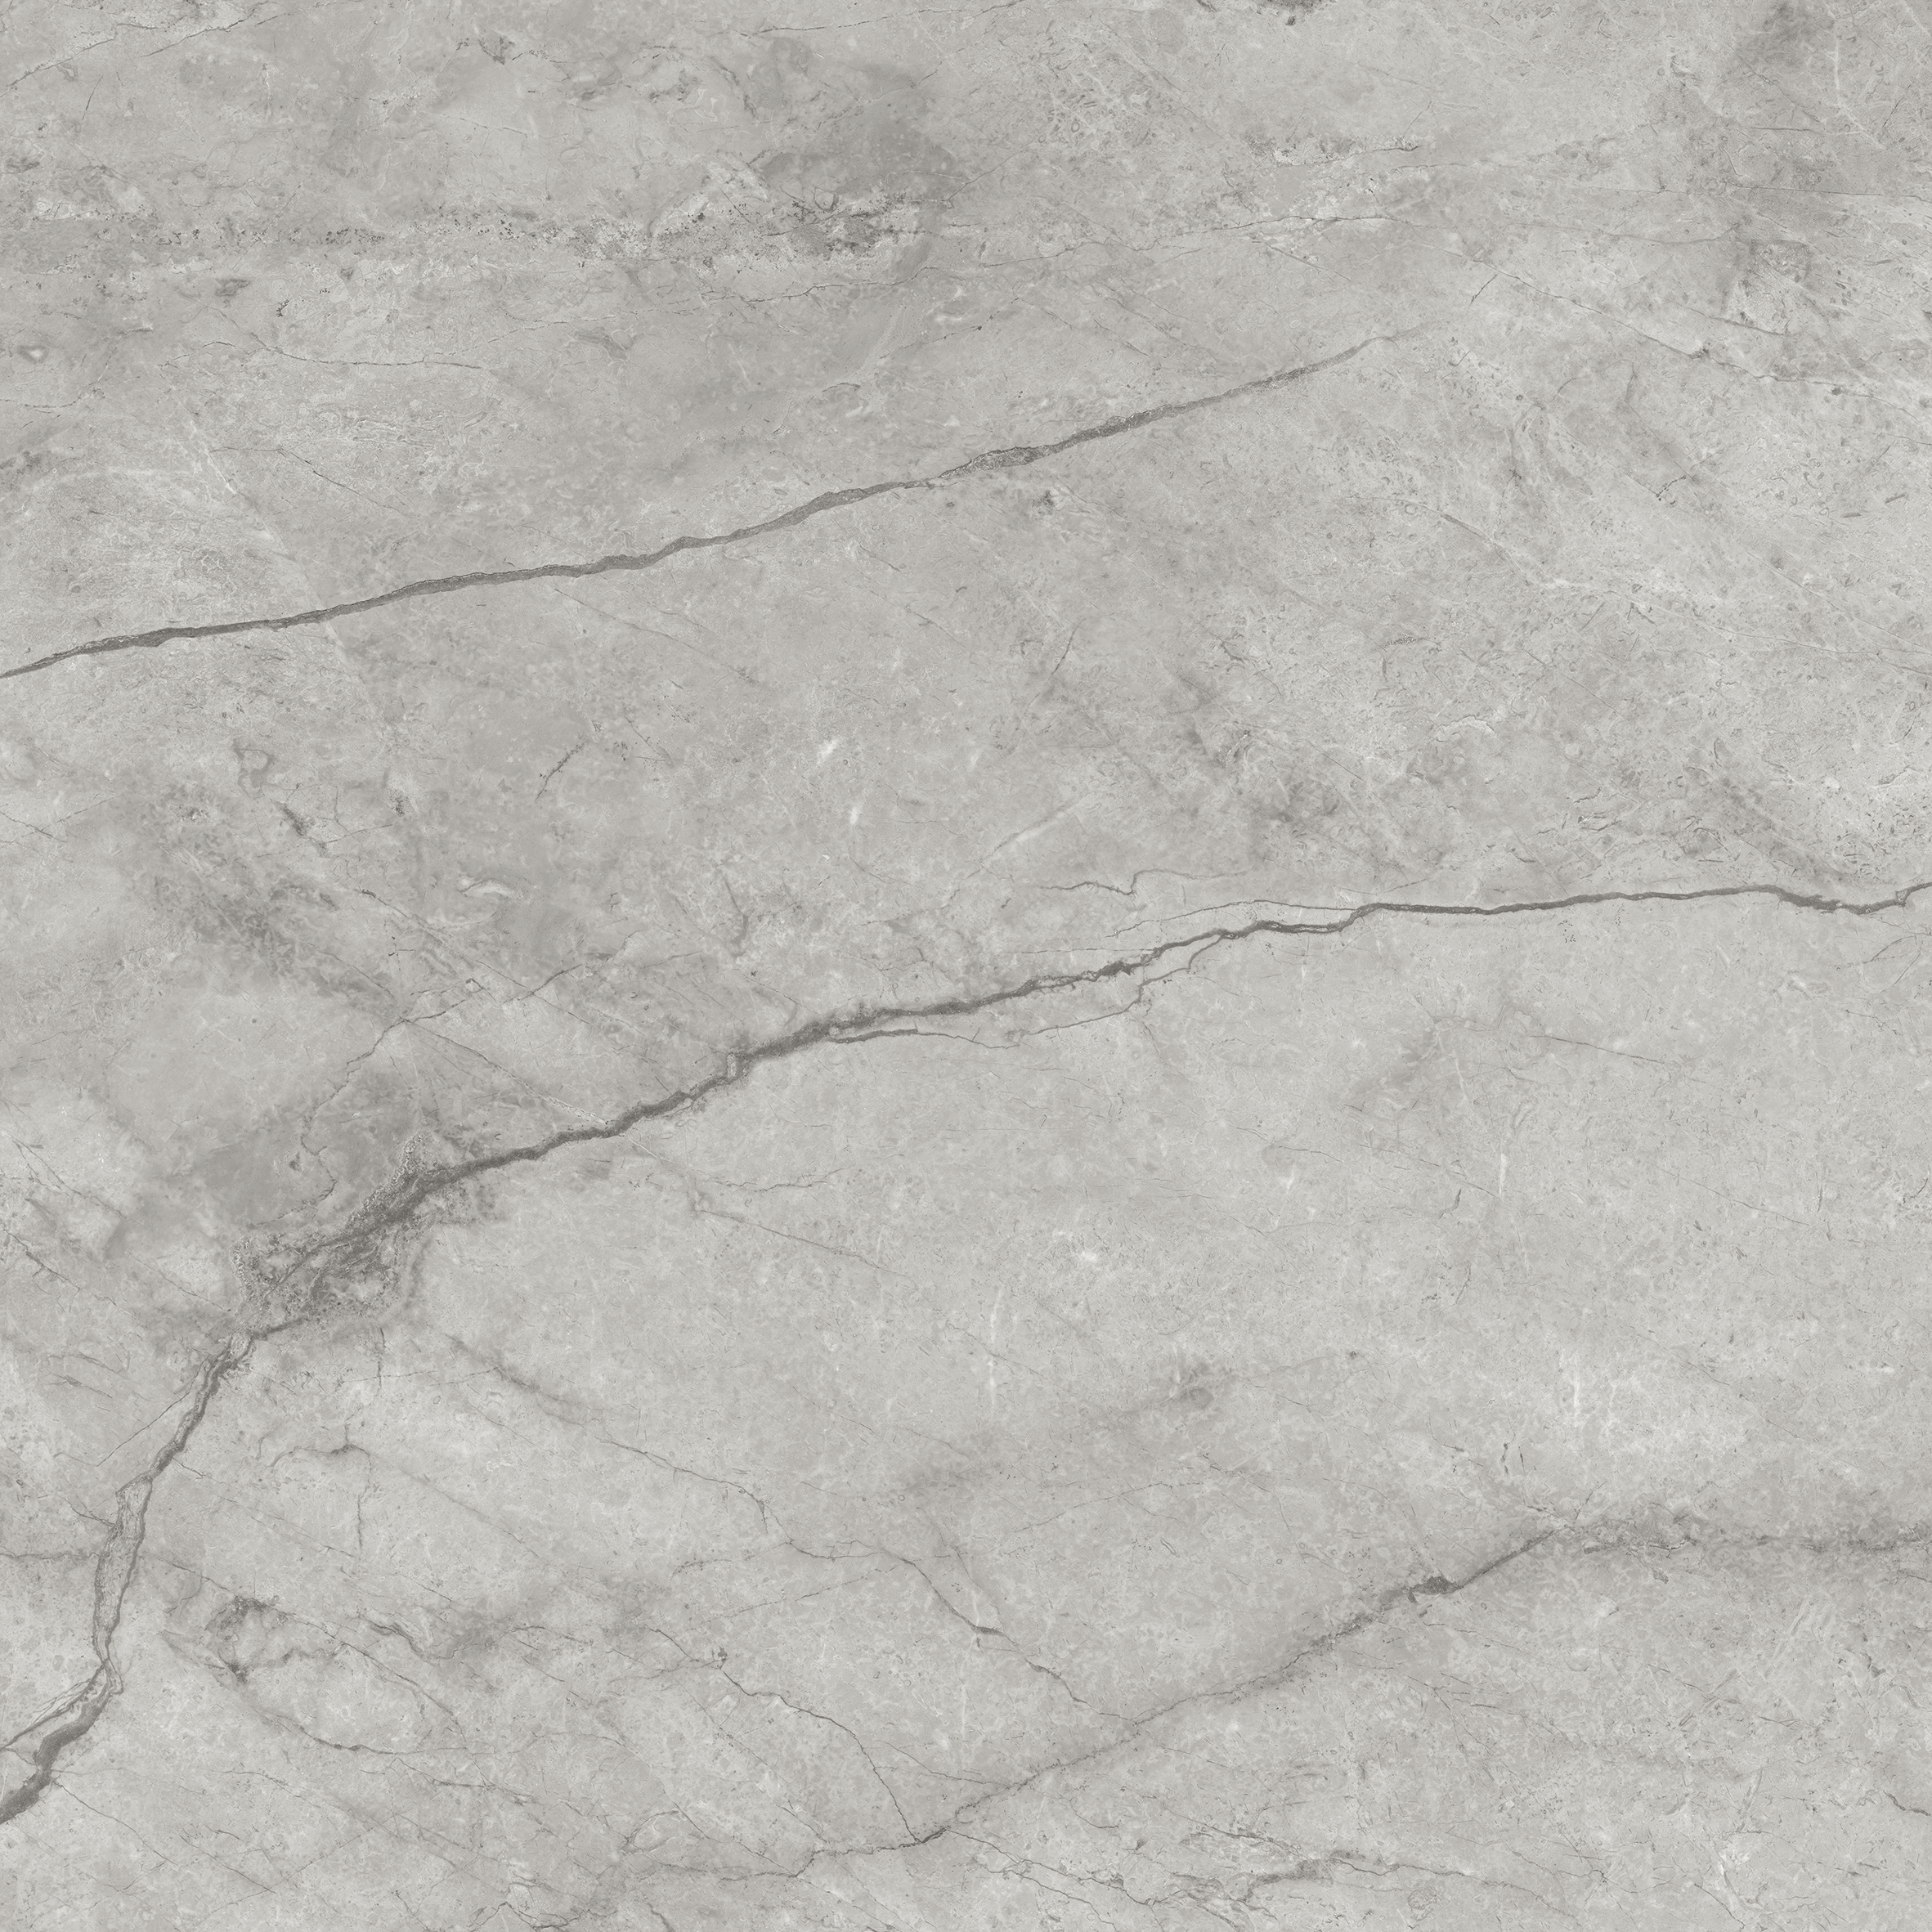 paradiso argento pattern glazed porcelain field tile from la marca anatolia collection distributed by surface group international honed finish rectified edge 32x32 square shape